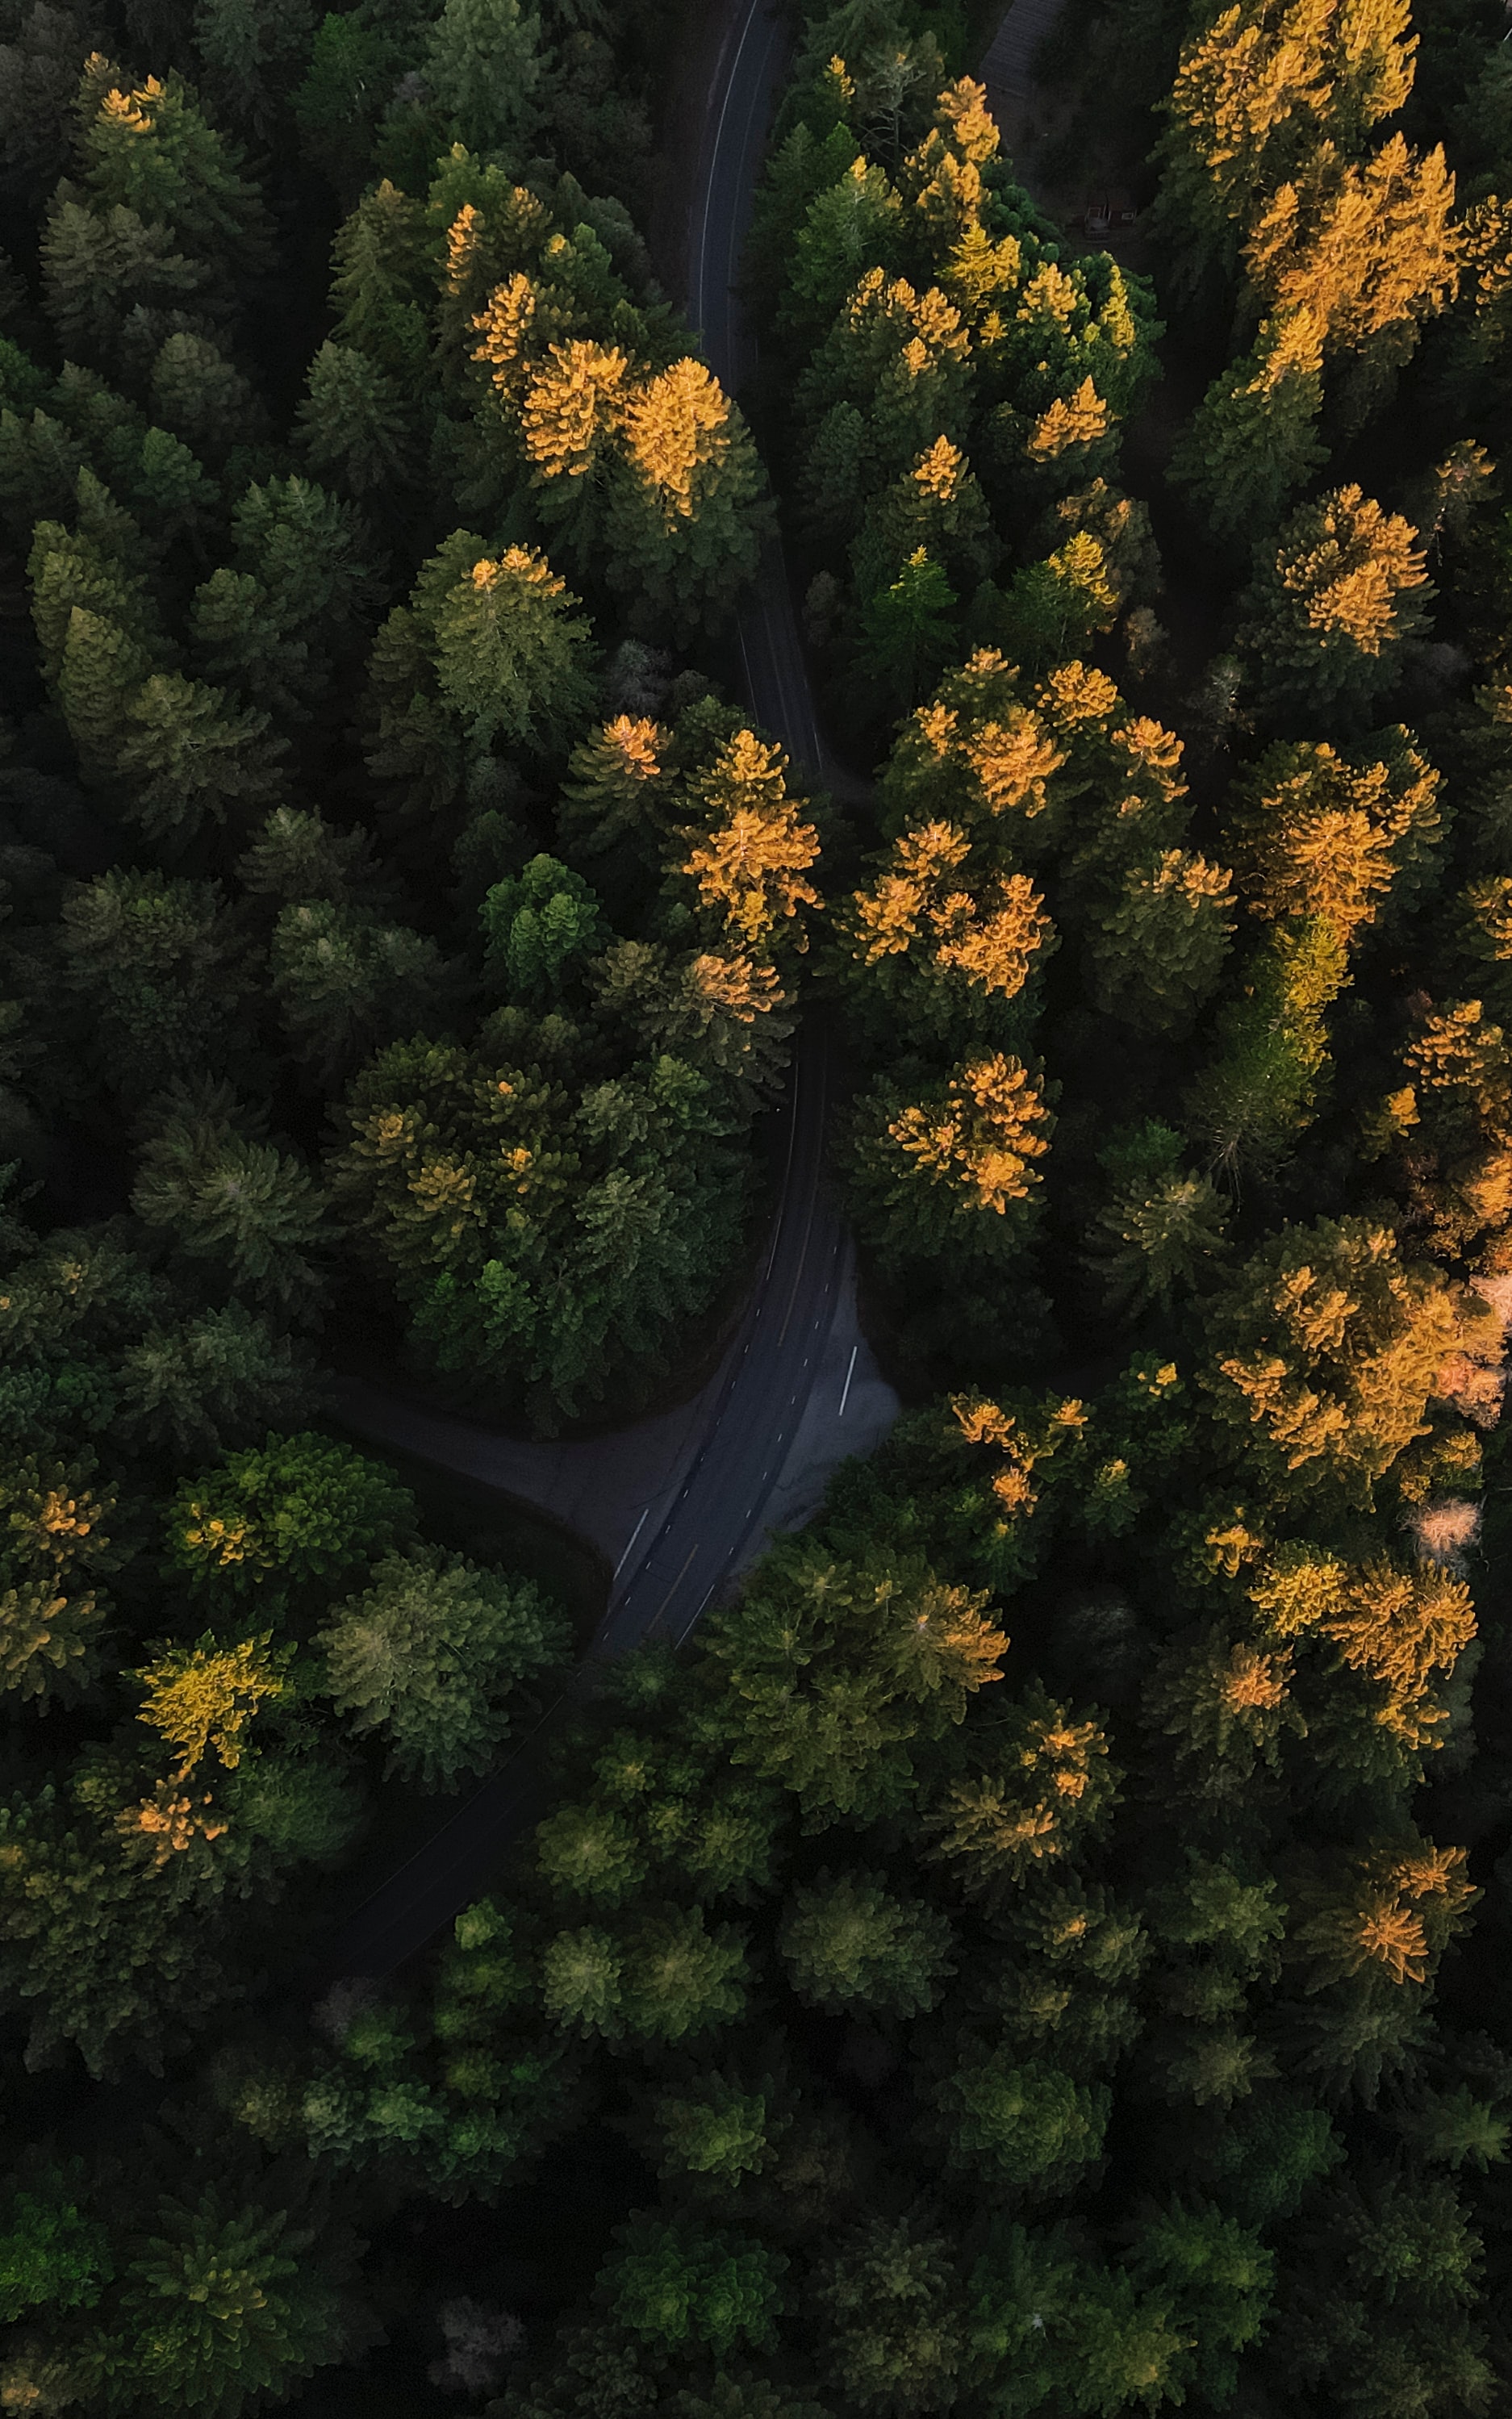 view from above, nature, trees, road, forest, winding, sinuous